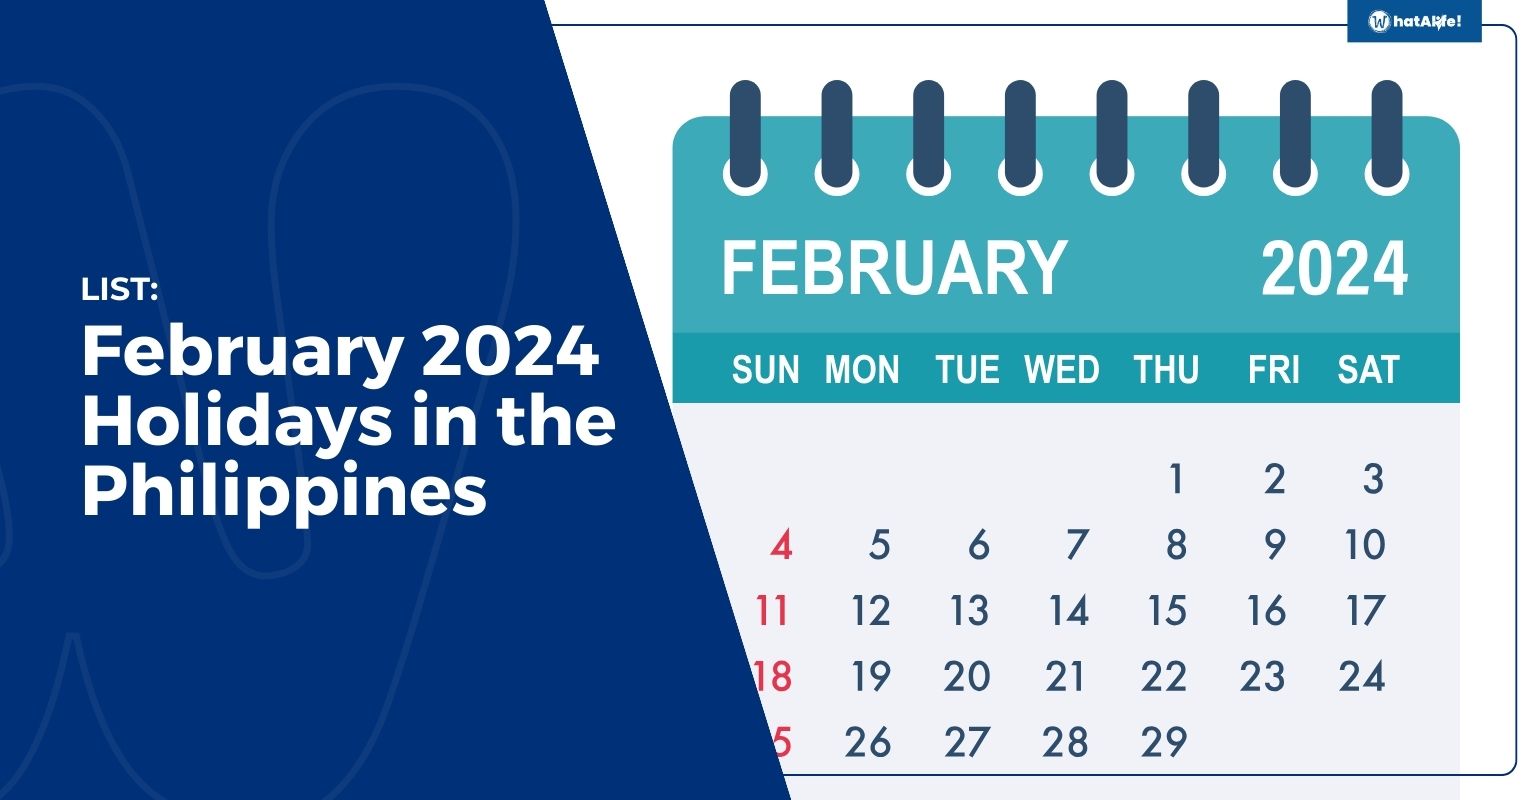 GUIDE: Holidays in February 2024 Philippines